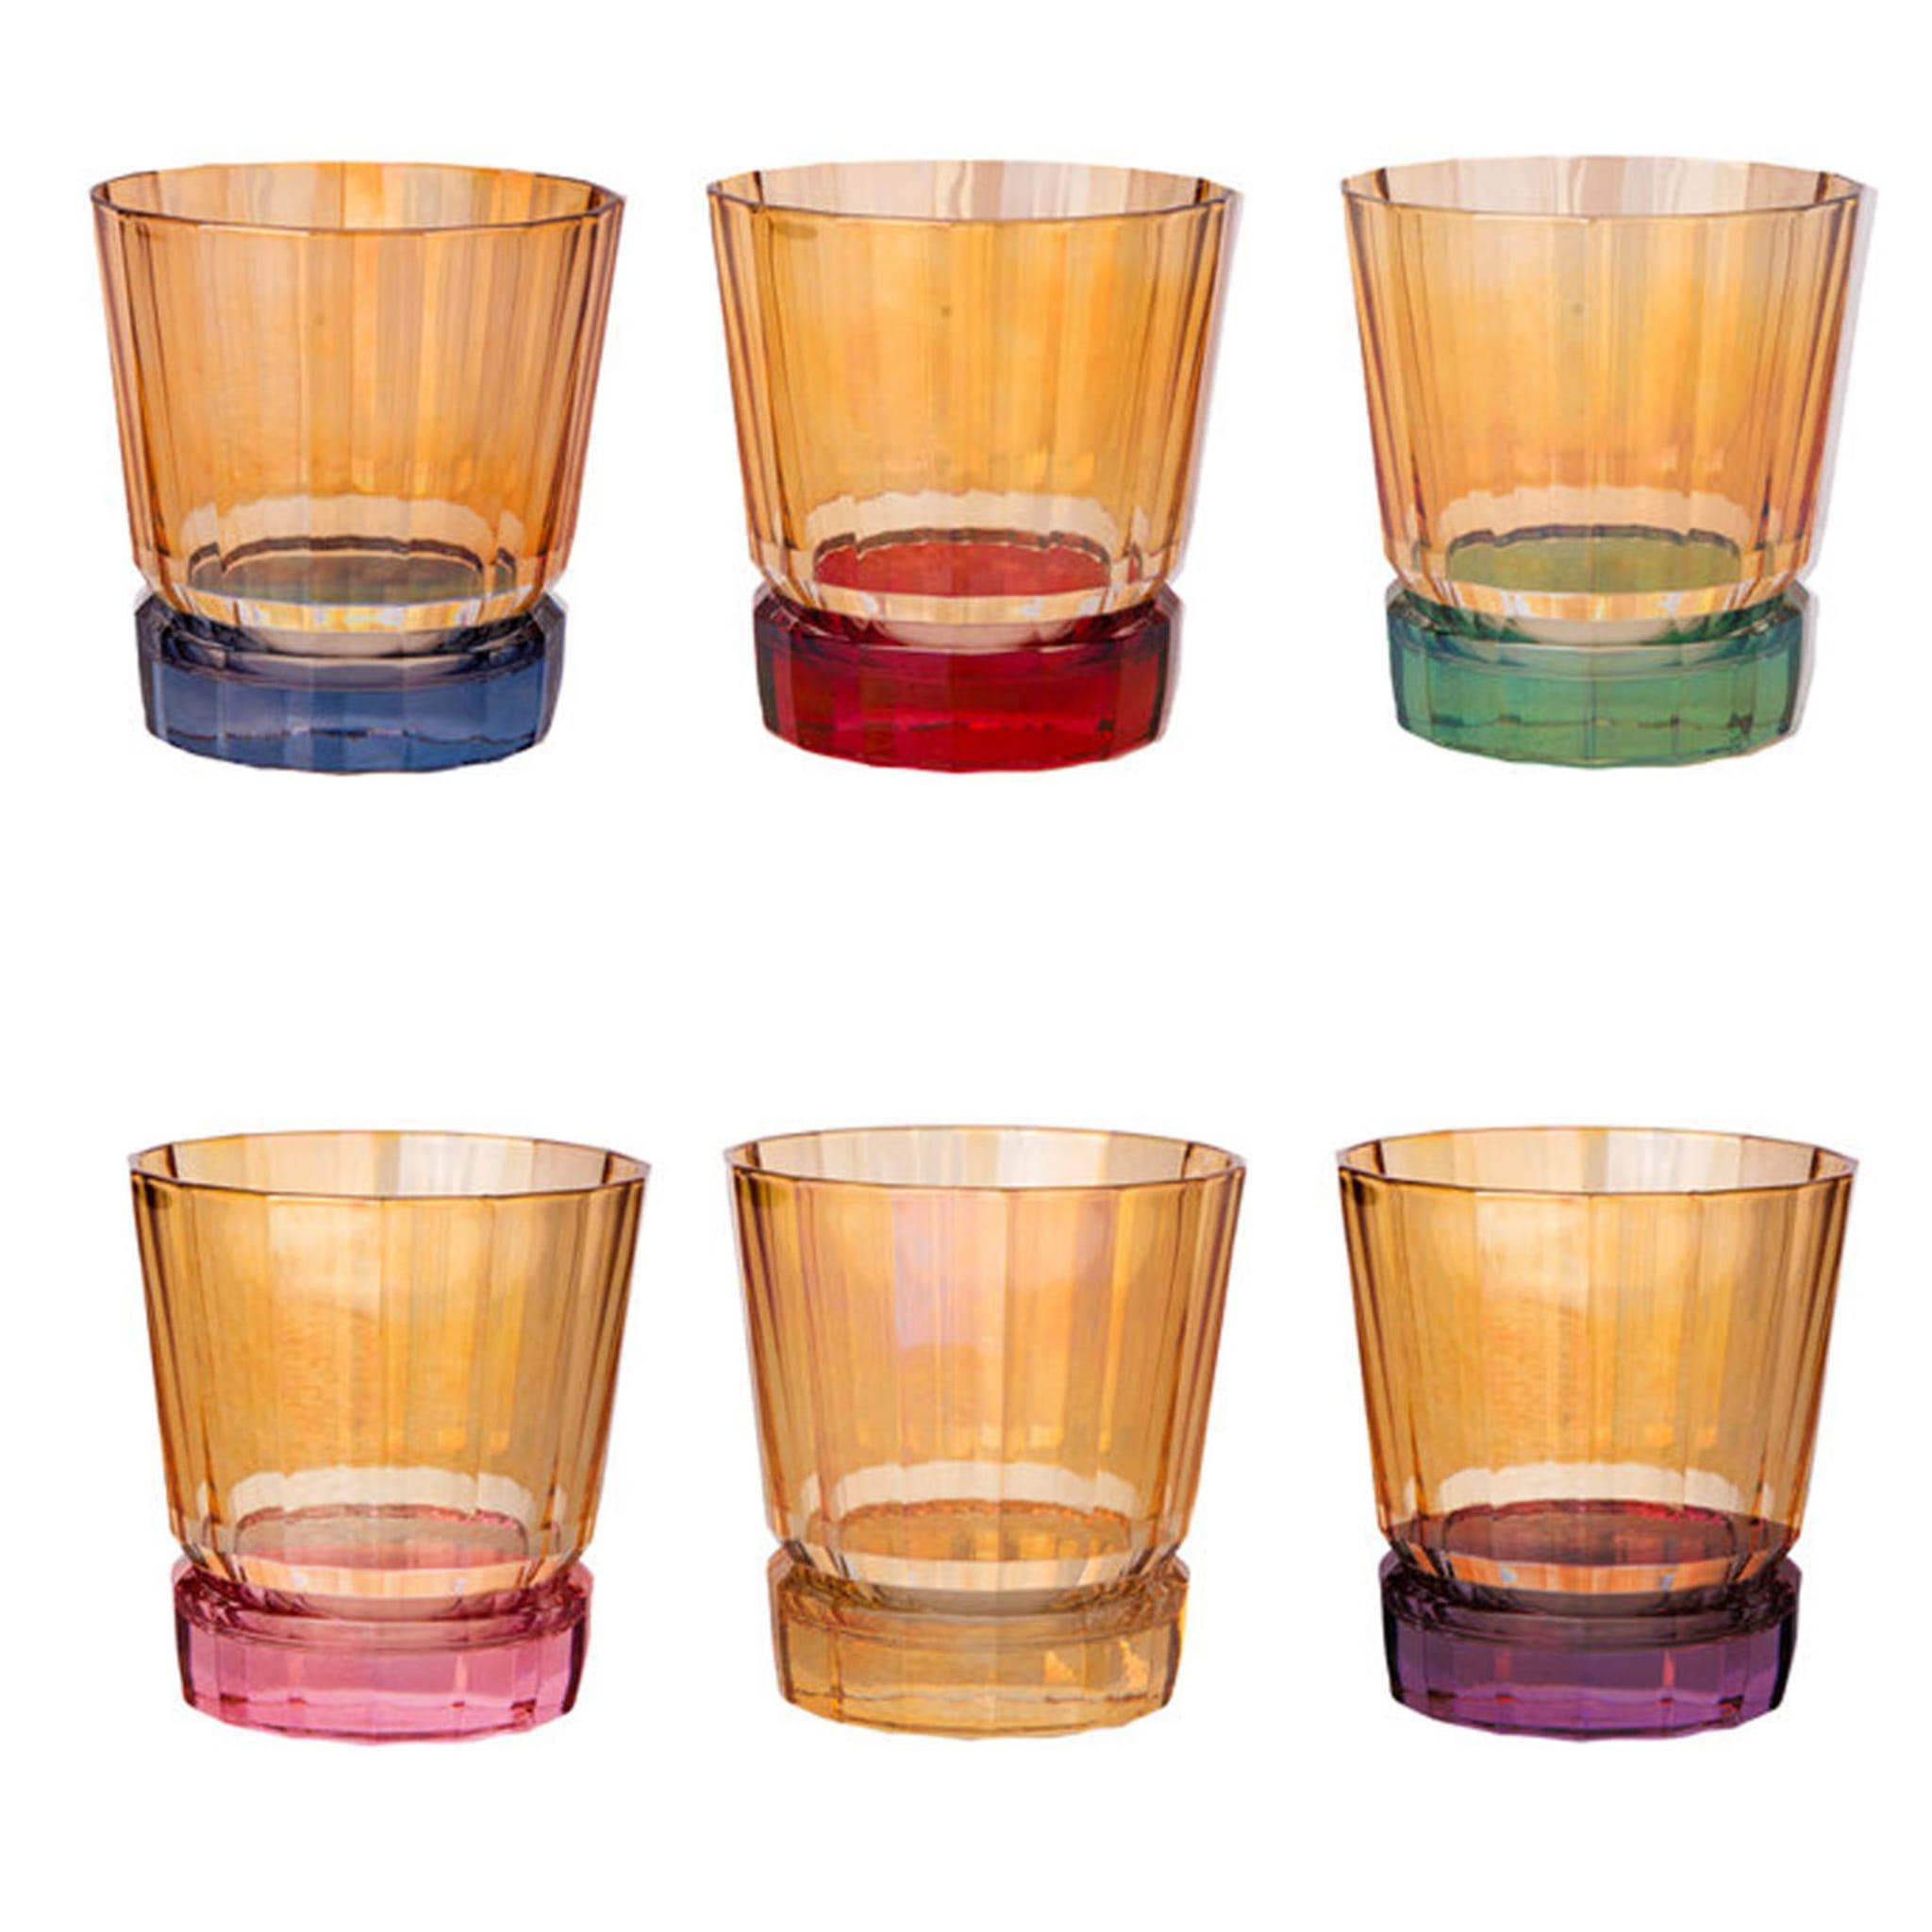 A rainbow of colors that will enliven any occasion, this set of six water glasses is elegant and eclectic. It can be used everyday or, combined with the other sets in the same Madagascar Collection to create a striking effect on a neutral-tone or